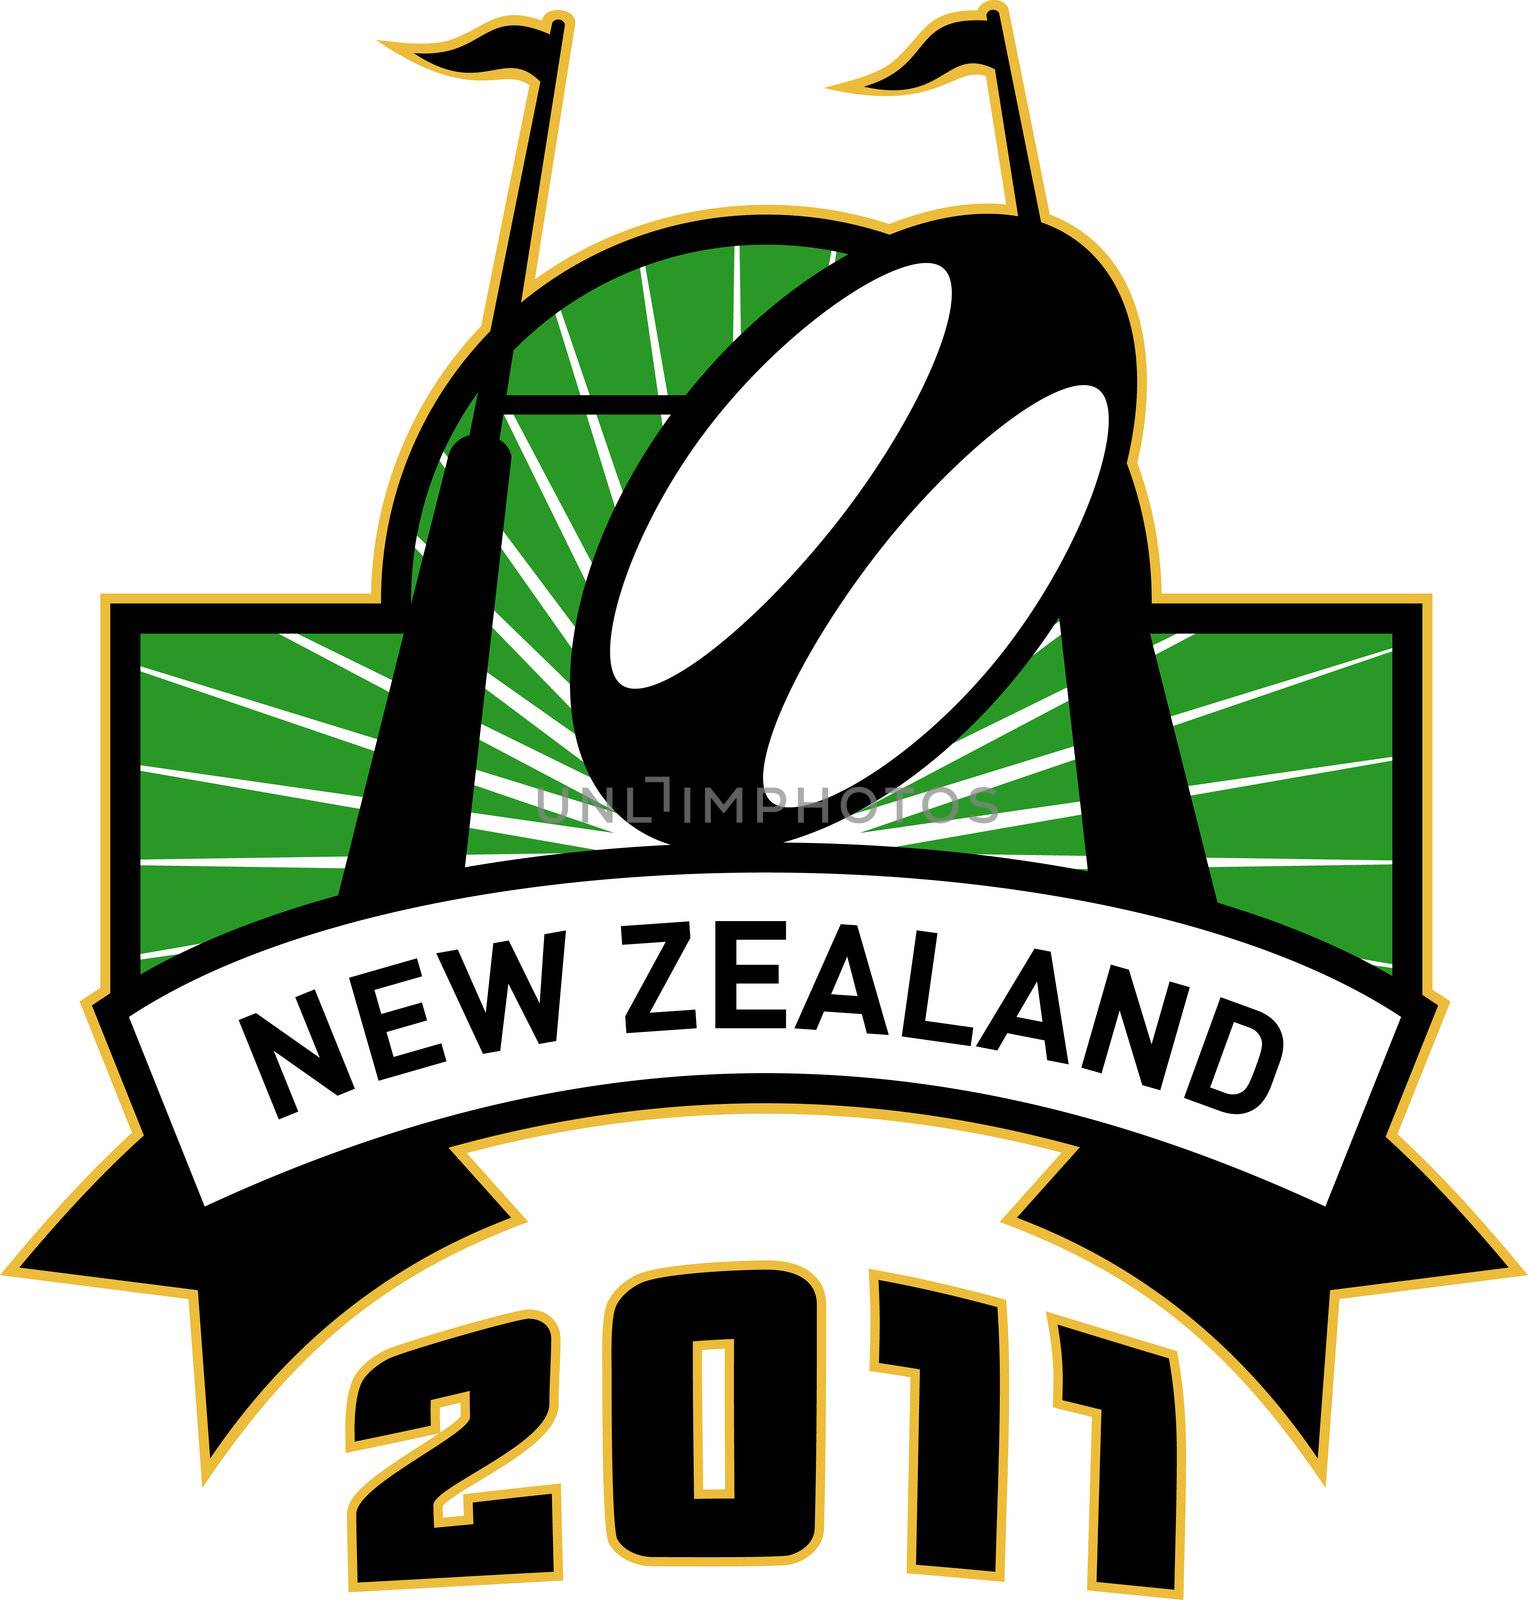 rugby goal post ball new zealand 2011 by patrimonio